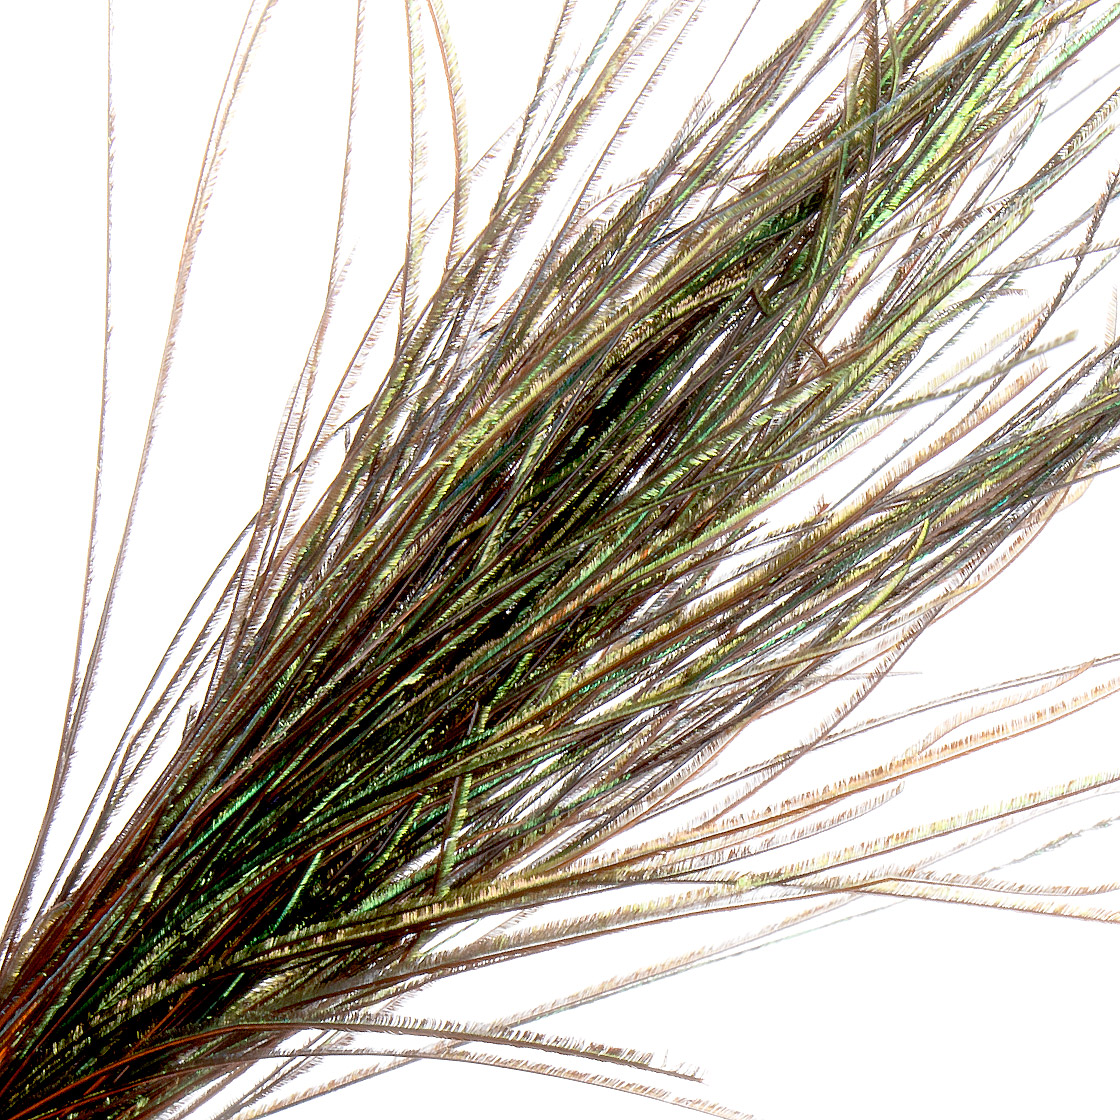 Details about   Peacock Herl Feathers Assorted Sizes Fishing flies Fly Tying Crafts Millinery UK